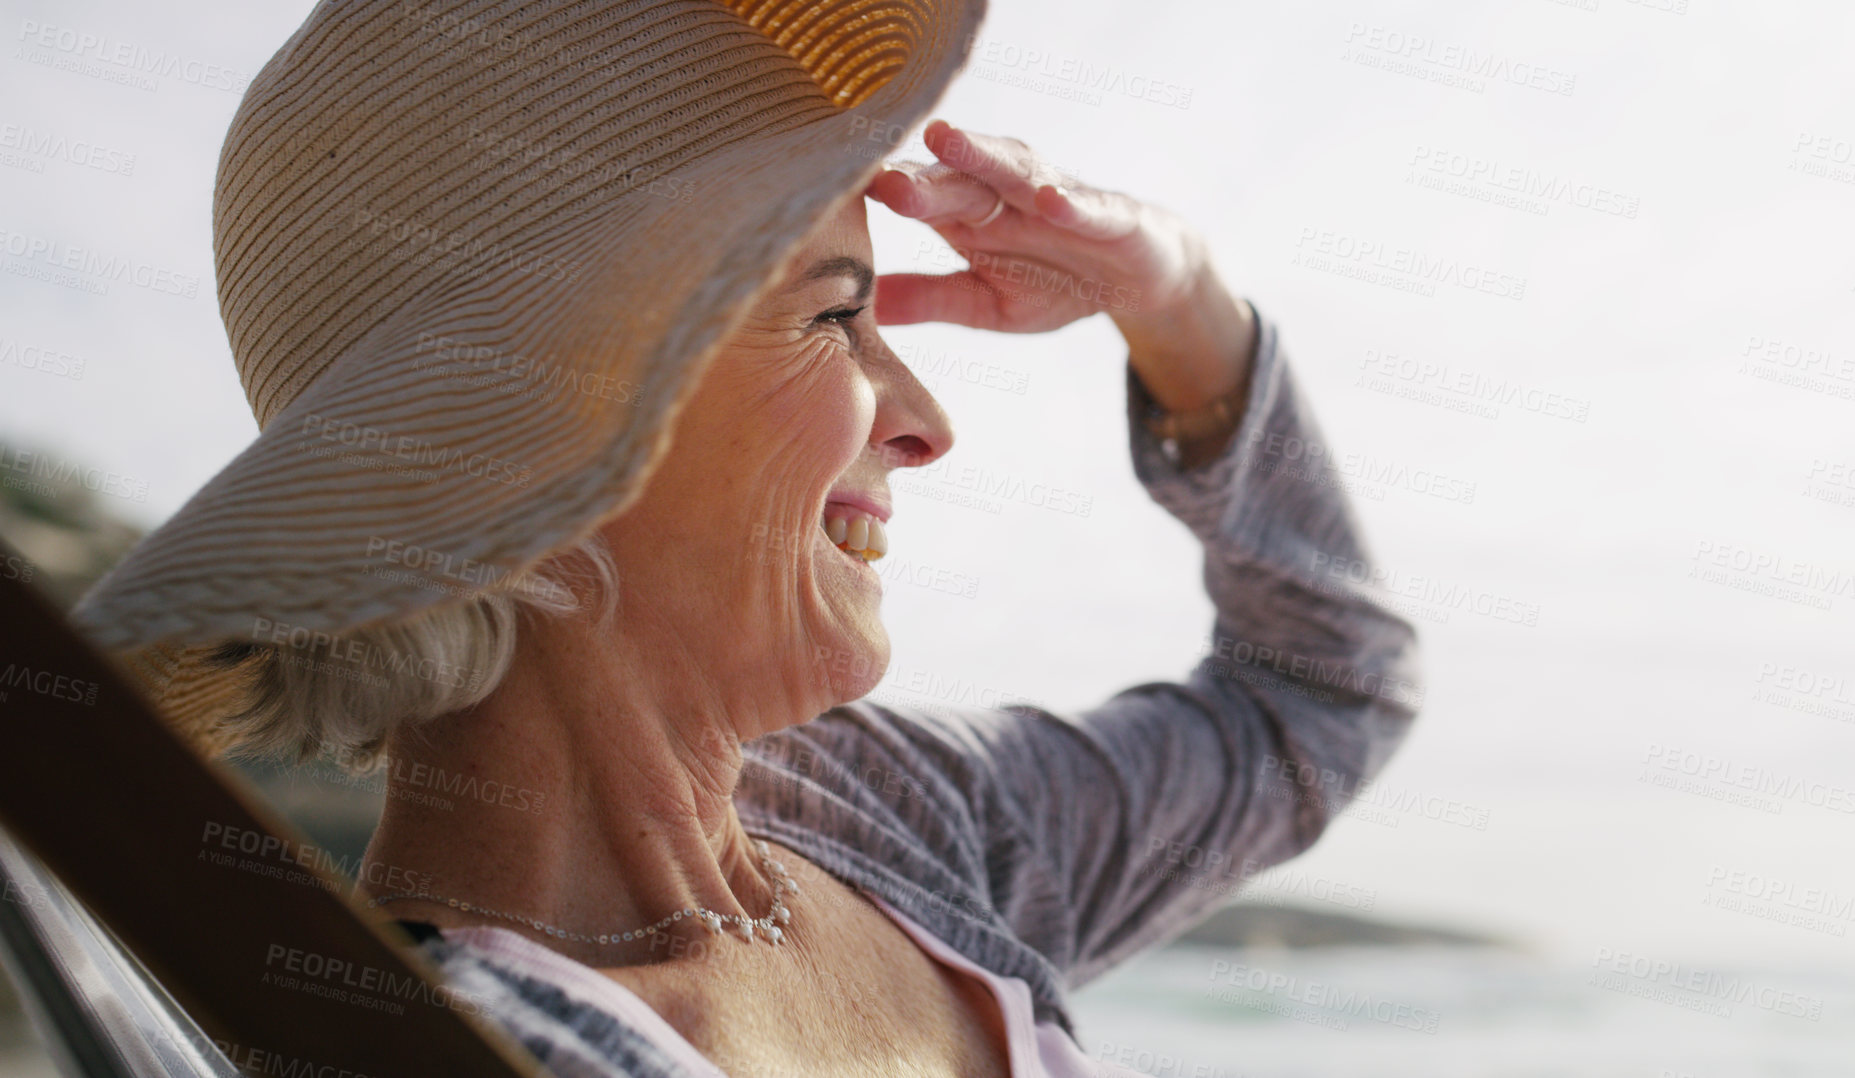 Buy stock photo Cropped shot of an attractive senior woman relaxing on a lounger on a summer's day at the beach